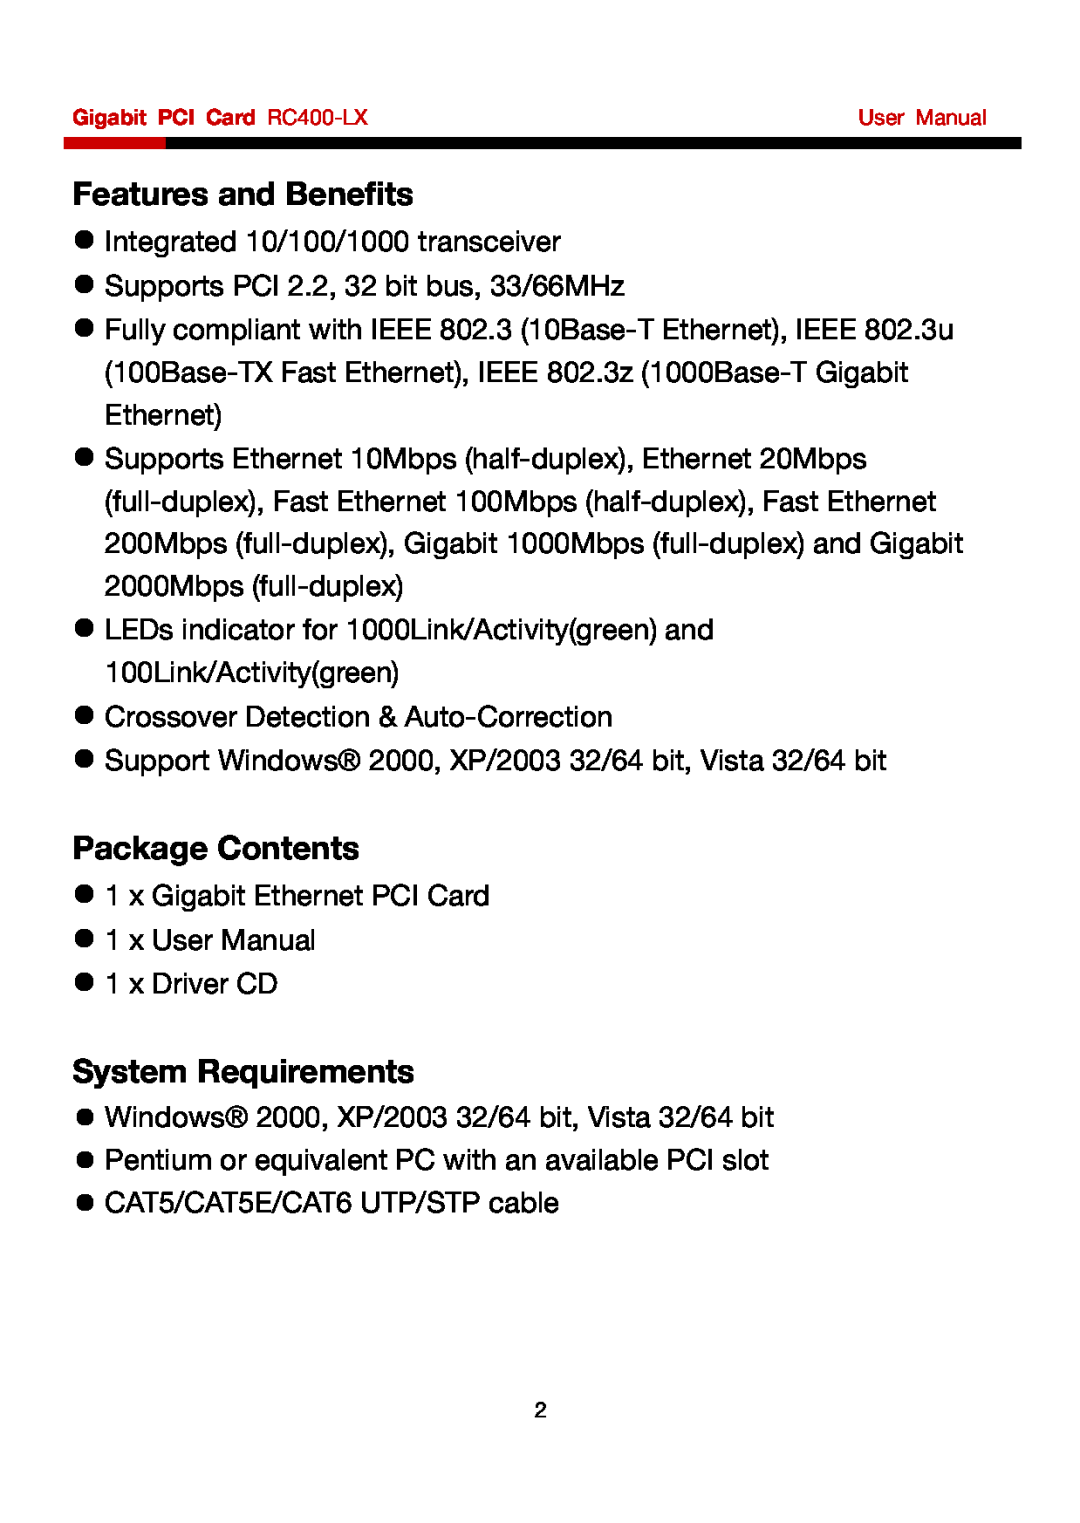 Rosewill RC-400 user manual Features and Benefits, Package Contents, System Requirements 